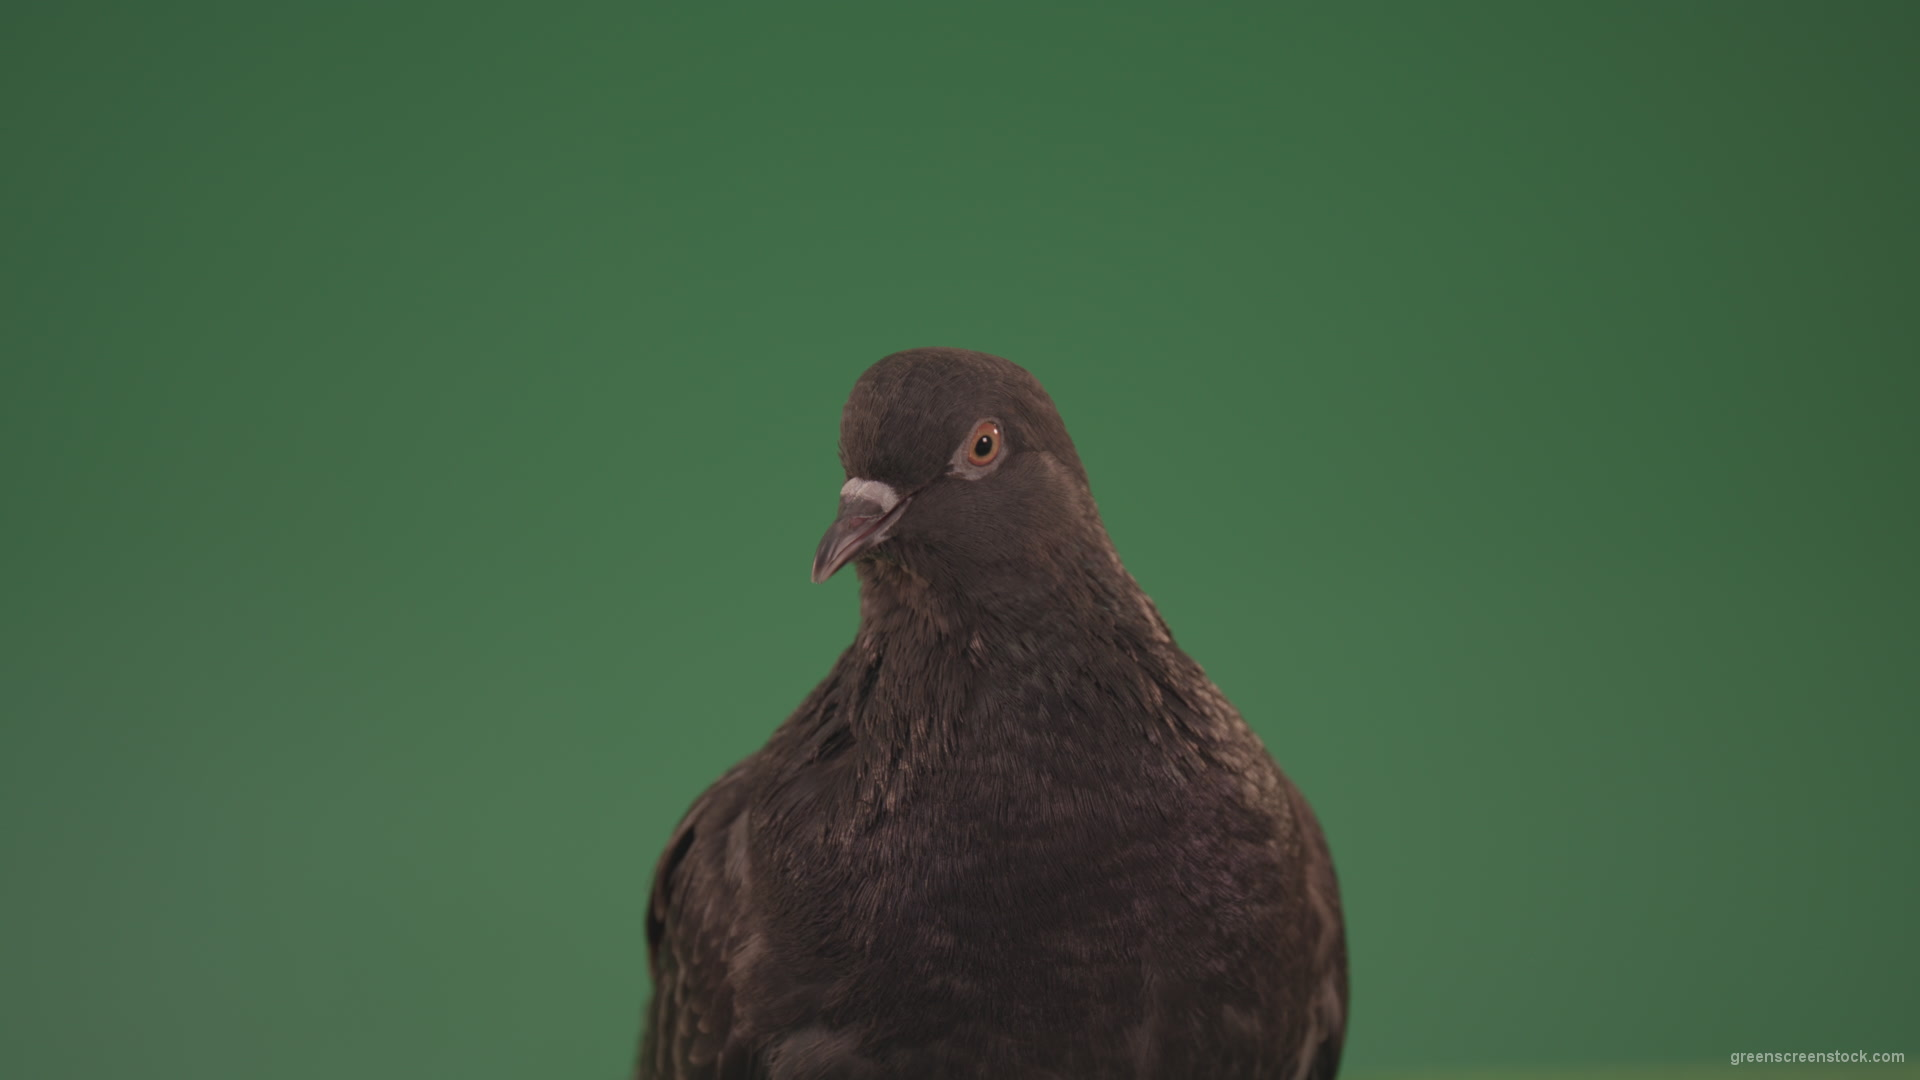 Bird-of-pigeon-is-sitting-on-the-house-and-looking-at-the-city-isolated-on-chromakey-background_009 Green Screen Stock